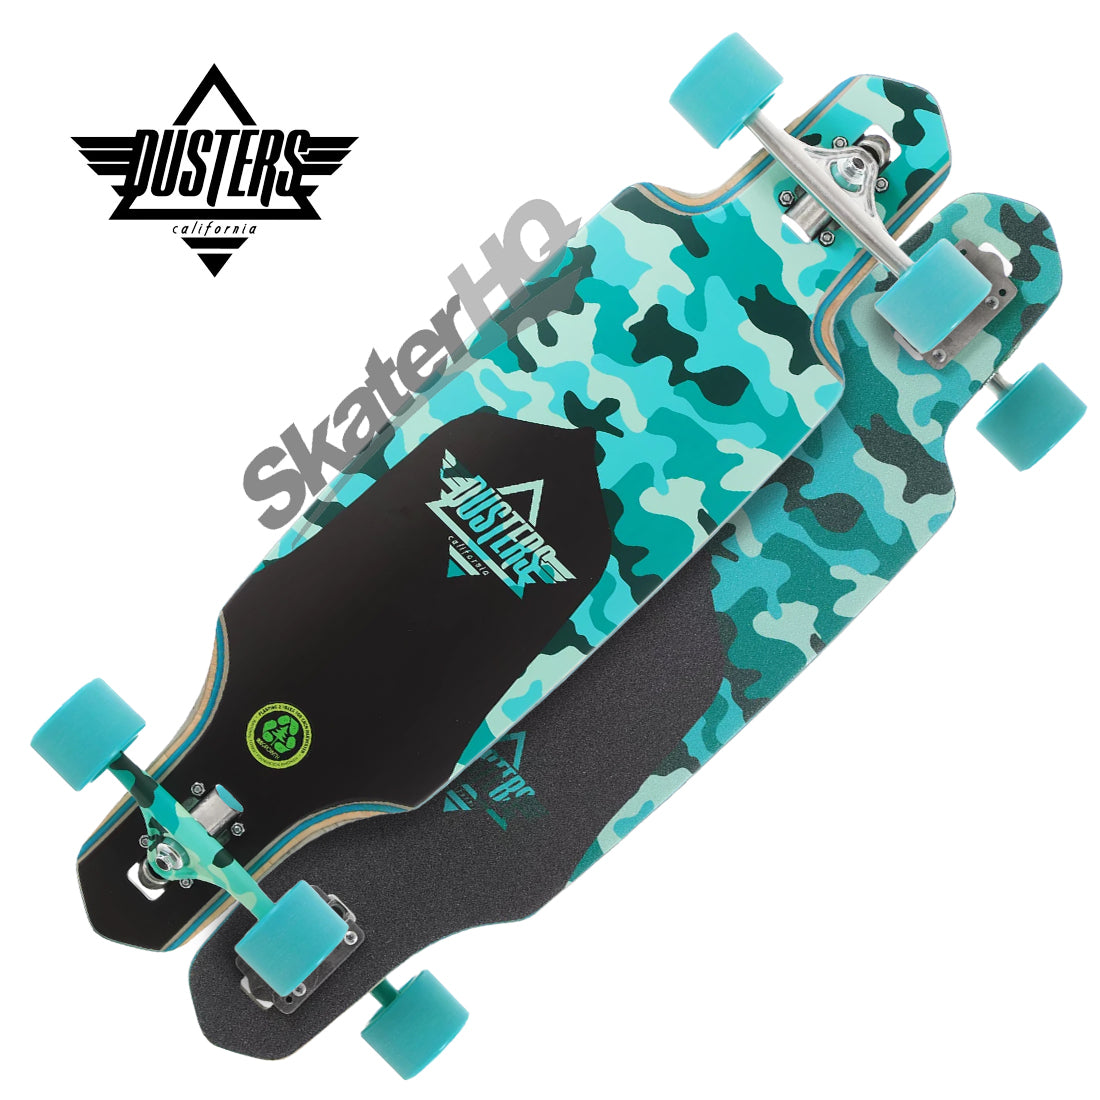 Dusters Channel Dragonfly 34 Longboard Complete - Teal Camo Skateboard Completes Longboards